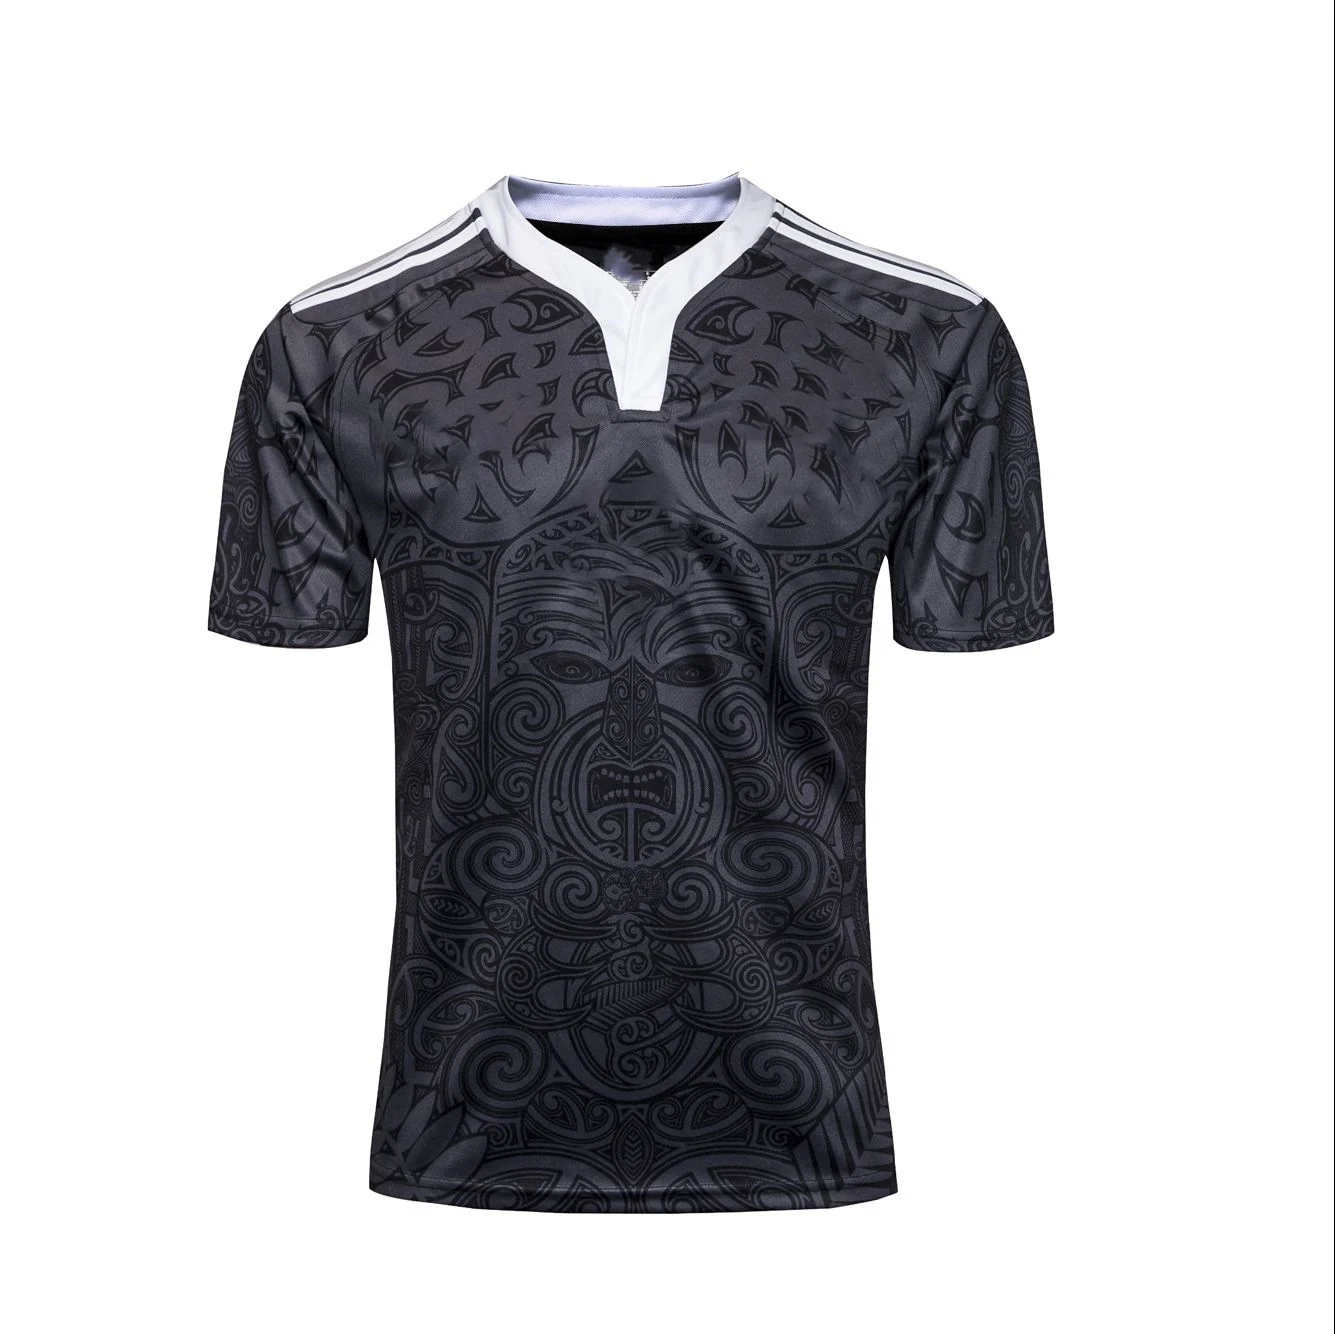 LQWW New Zealand 100Th Anniversary Edition Rugby Jersey Quick-Dry Sportswear Color : Black, Size : 3X-Large 